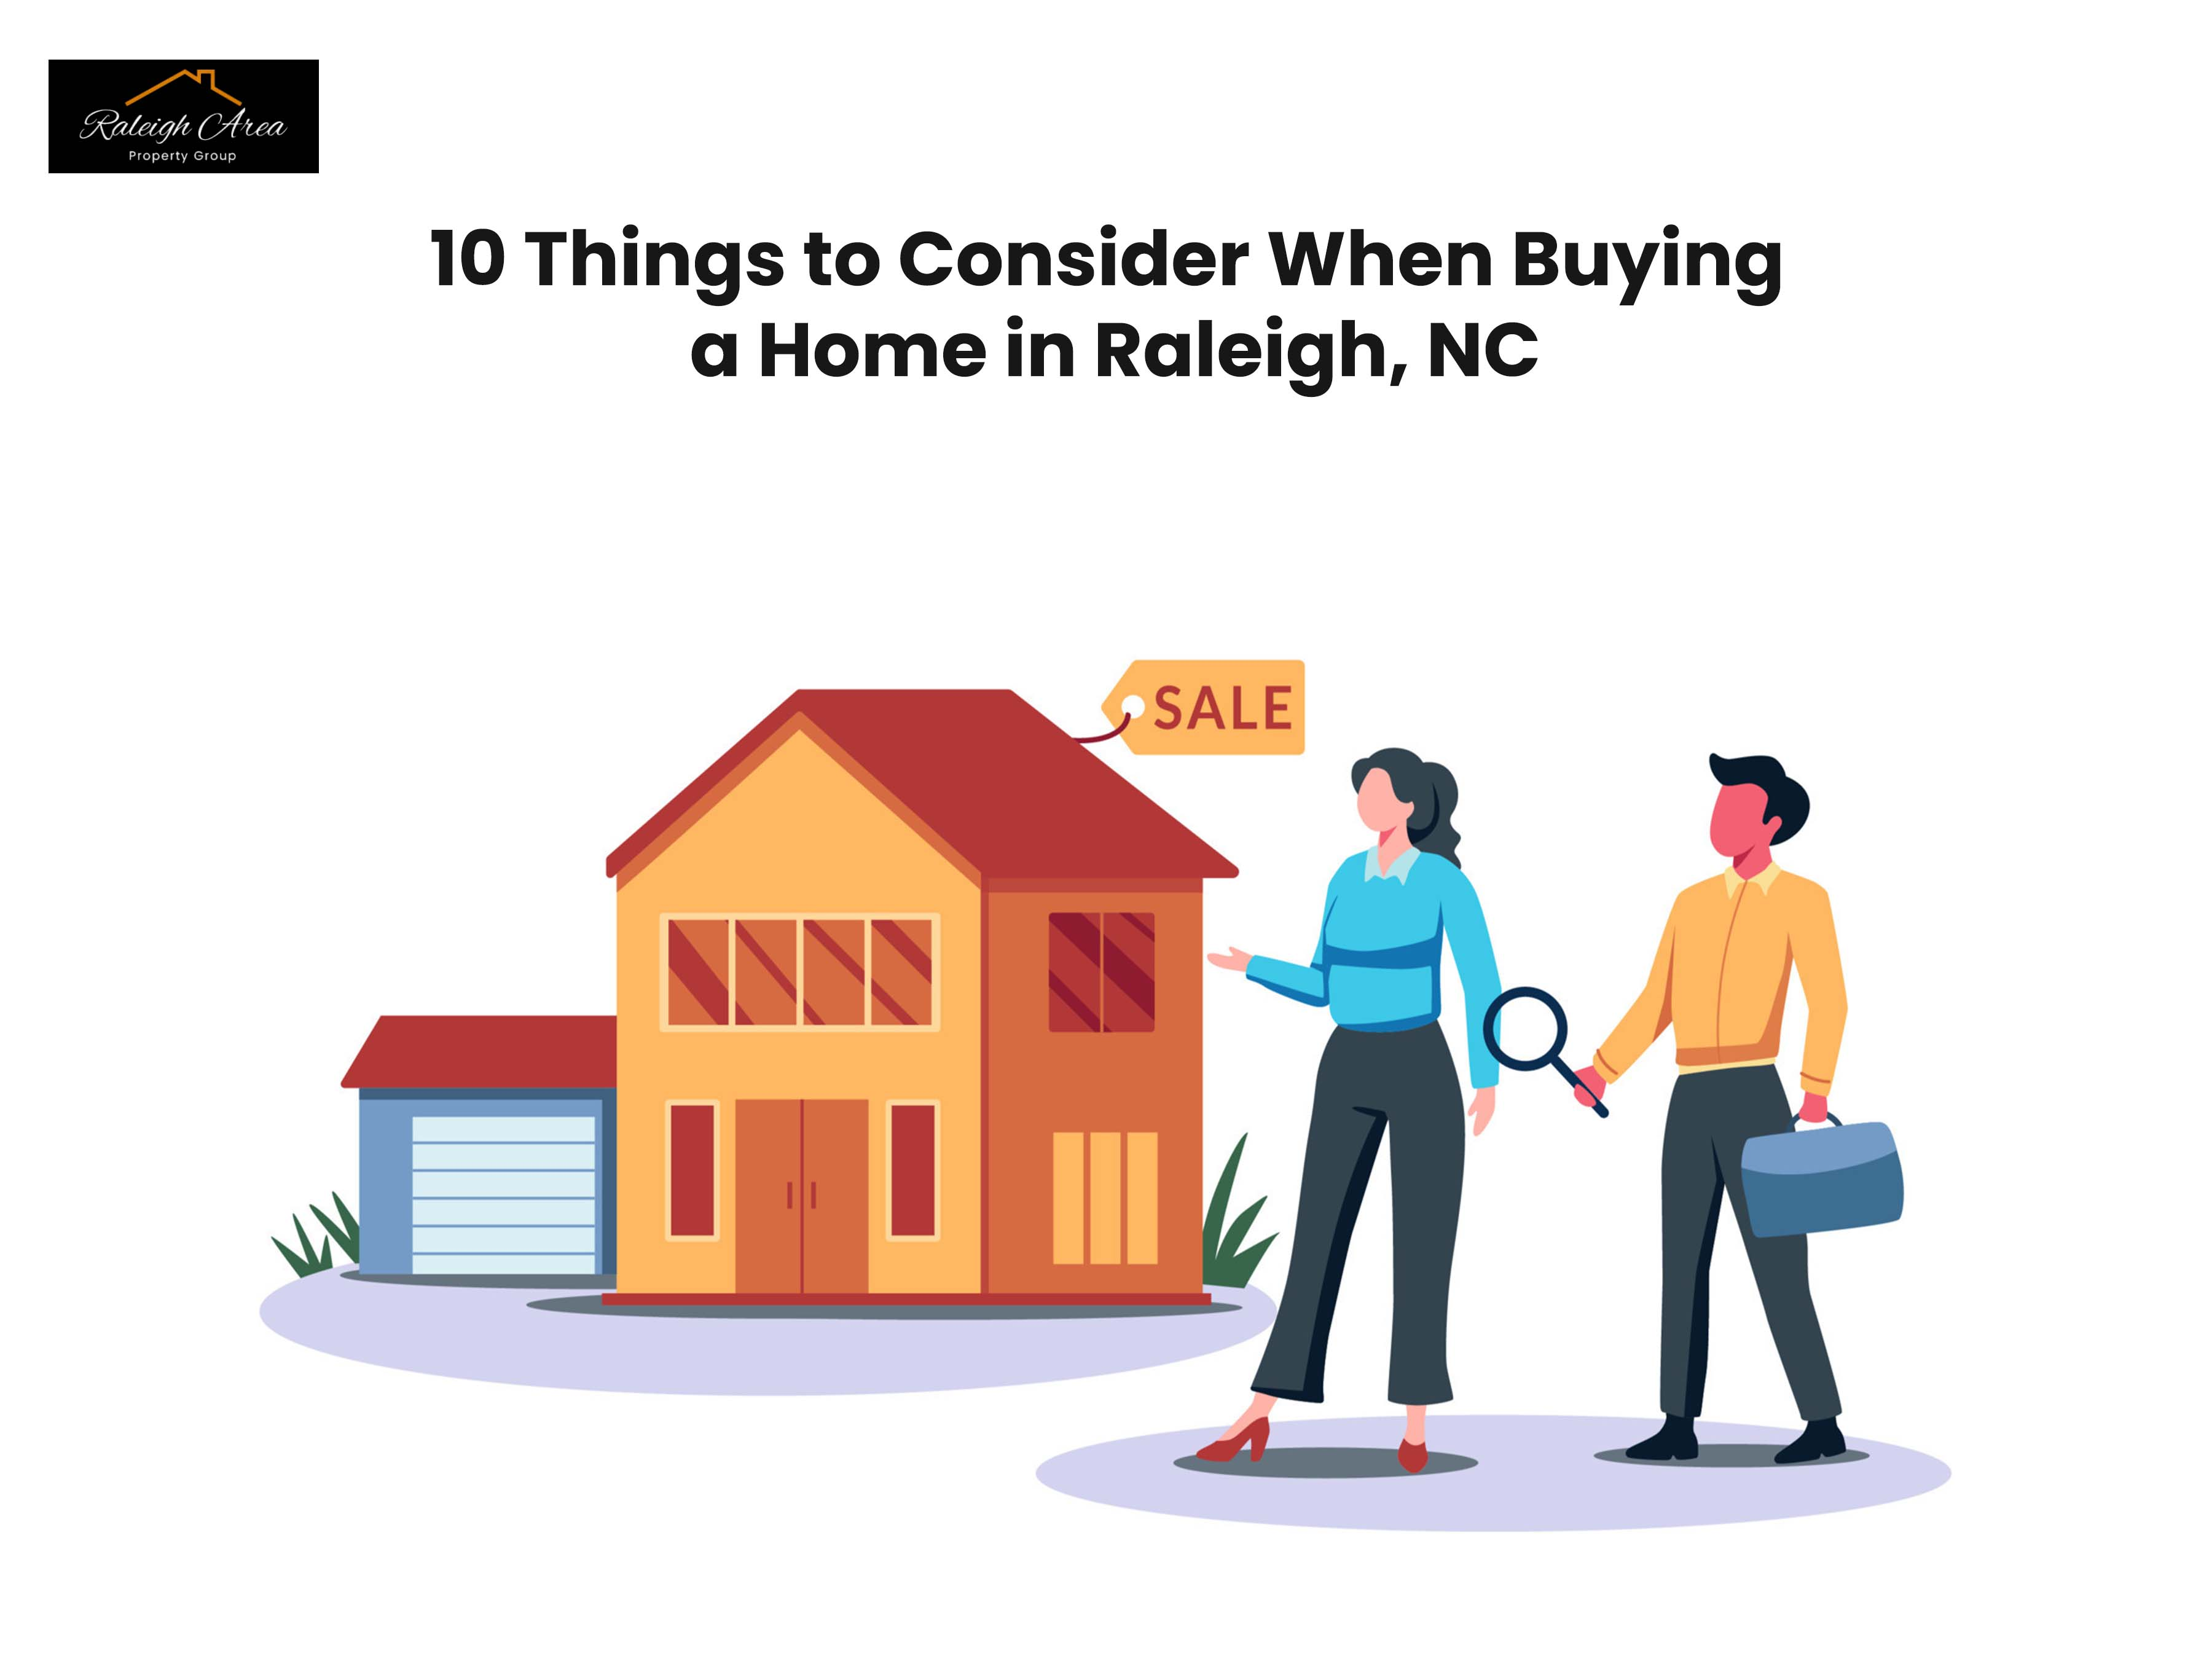 Things to Consider When Buying a Home in Raleigh, NC